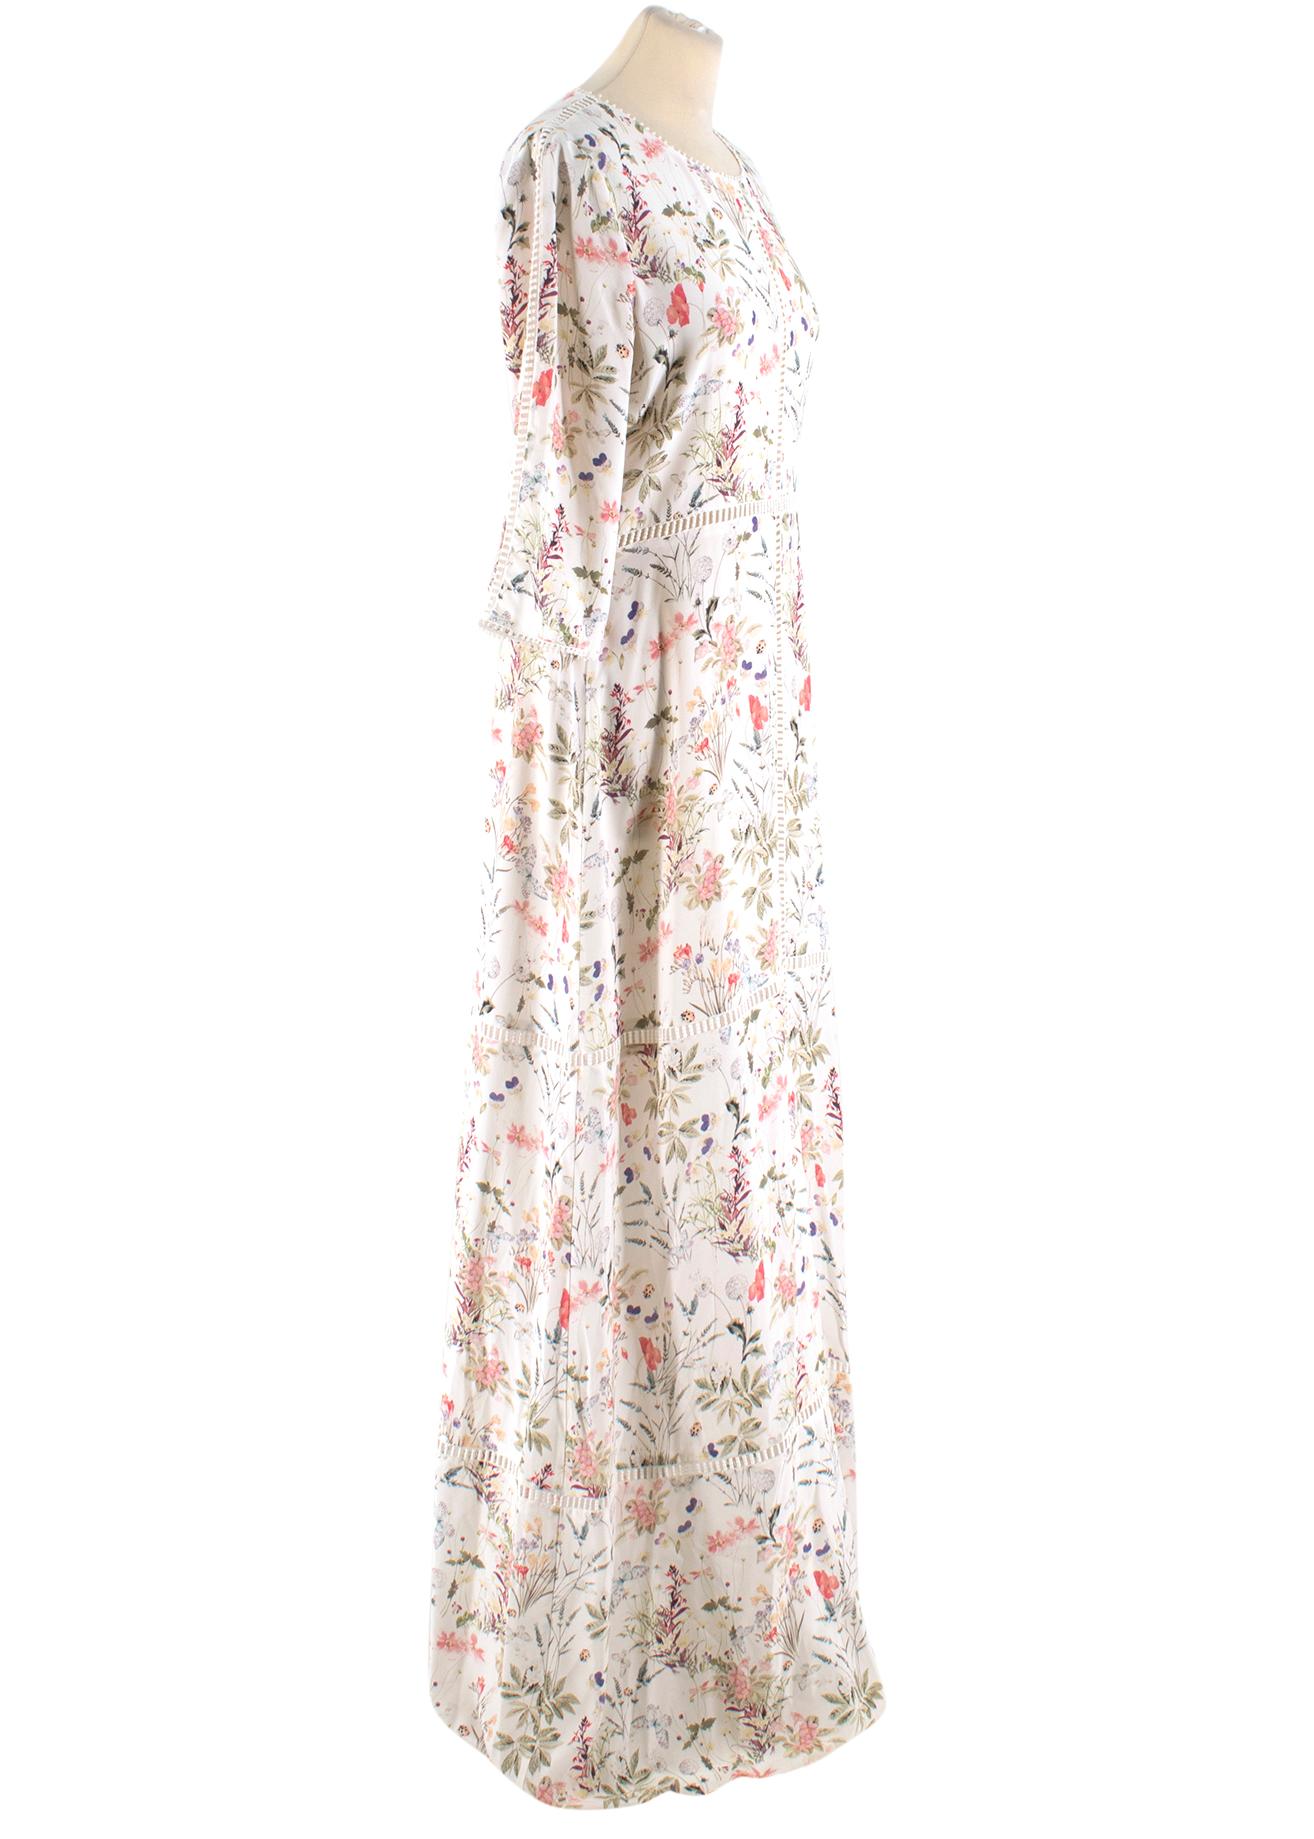 The Kooples Floral Print Long Silk Dress

- White, floral print long silk dress
- Circle lace-trimmed neckline and cuffs
- Jour echelle lace inserts 
- 3/4 sleeve length
- Centre-back concealed zip fastening

Please note, these items are pre-owned